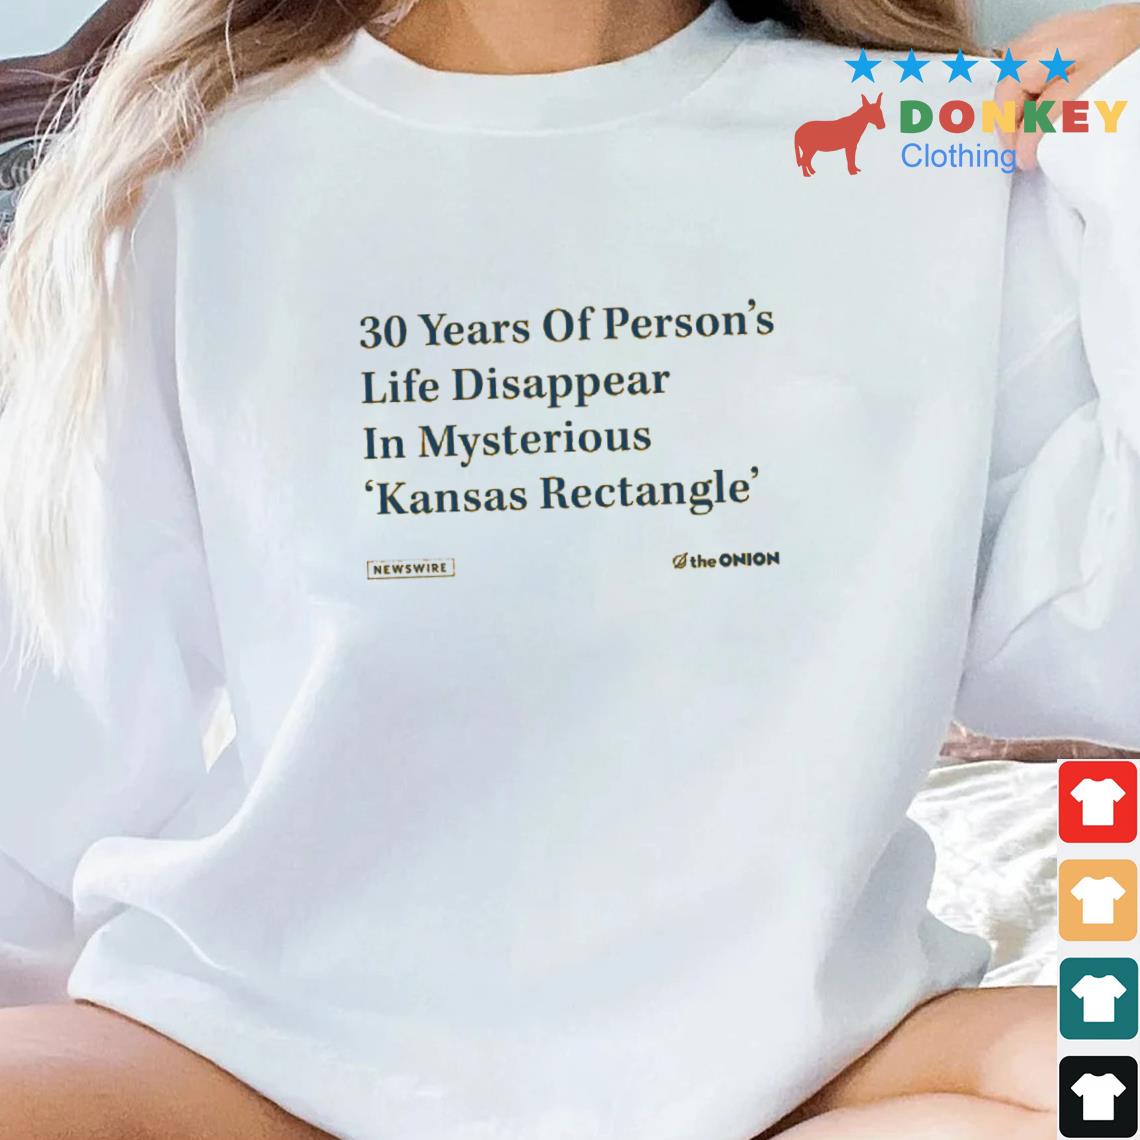 The Onion 30 Years Of Person's Life Disappear In Mysterious Kansas Rectangle Shirt